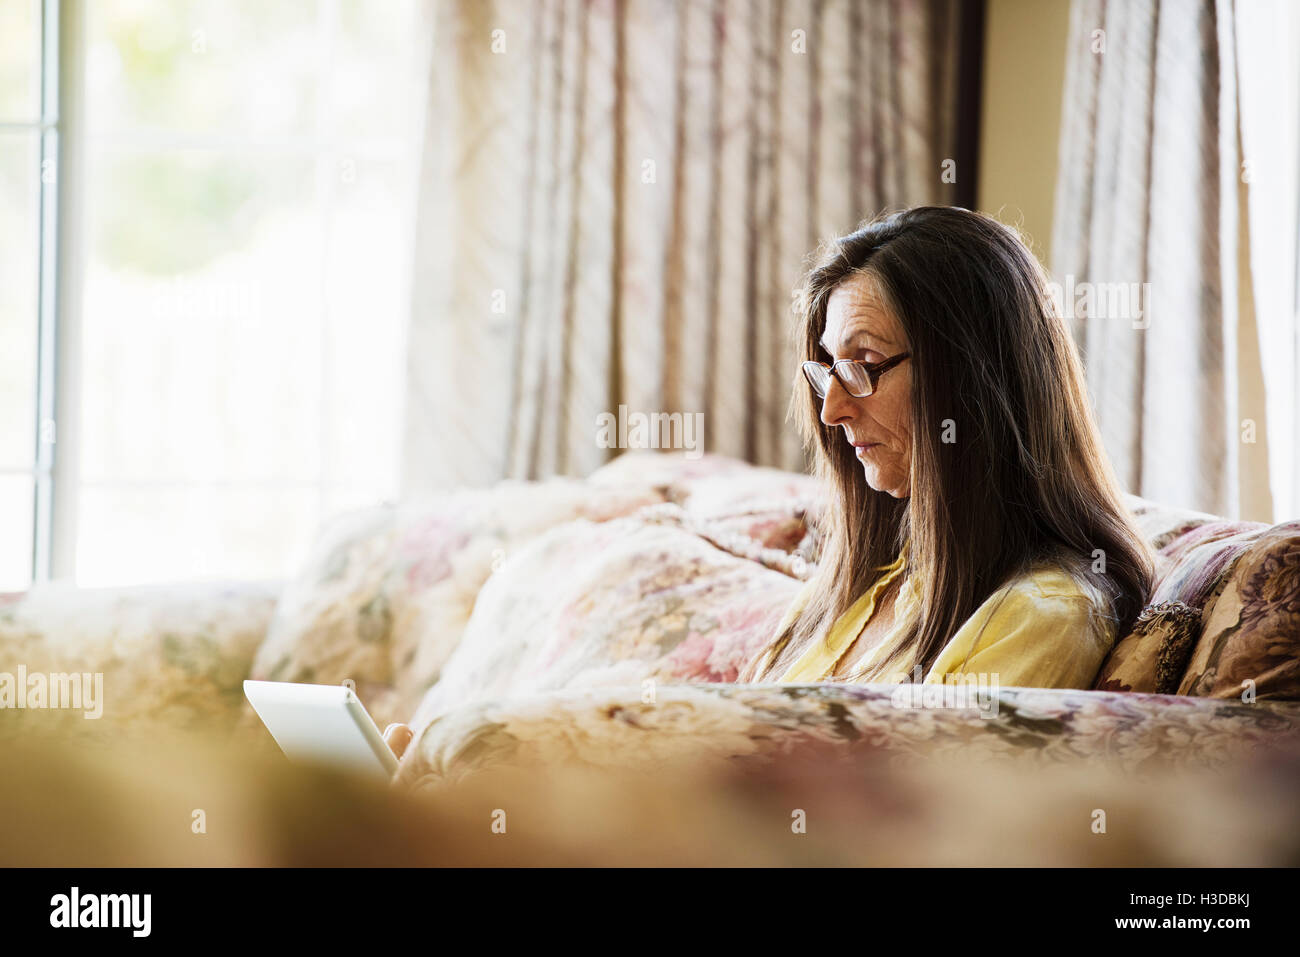 Senior woman with long brown hair sitting on a sofa, using a laptop computer, wearing reading glasses. Stock Photo